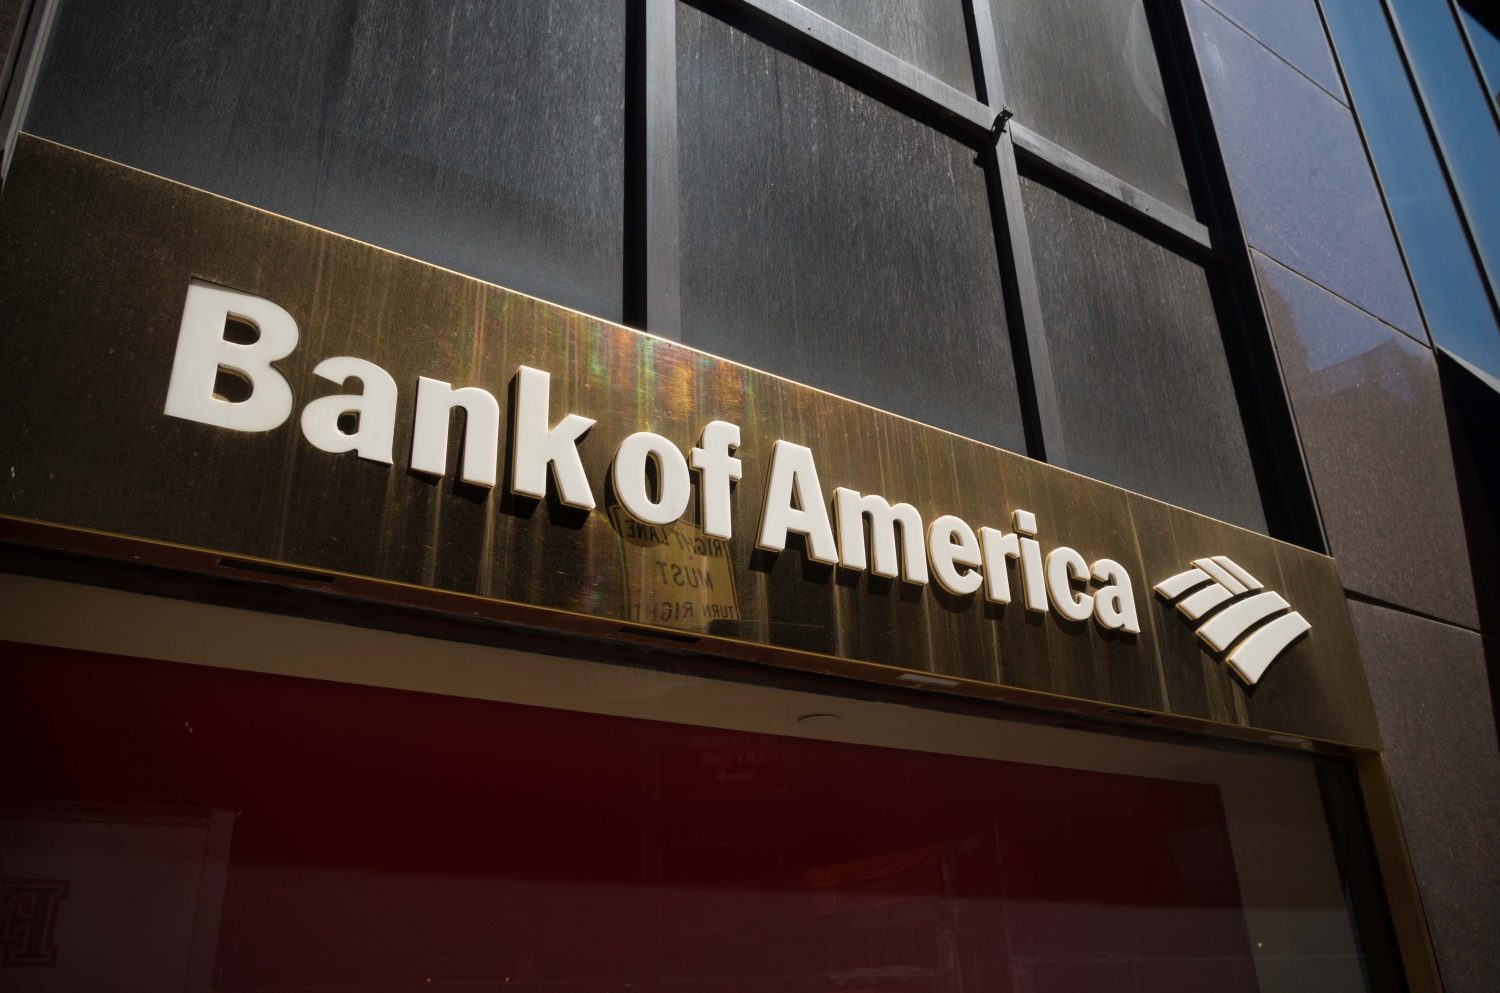 Bank of america files crypto currency patents 1 btc price chart